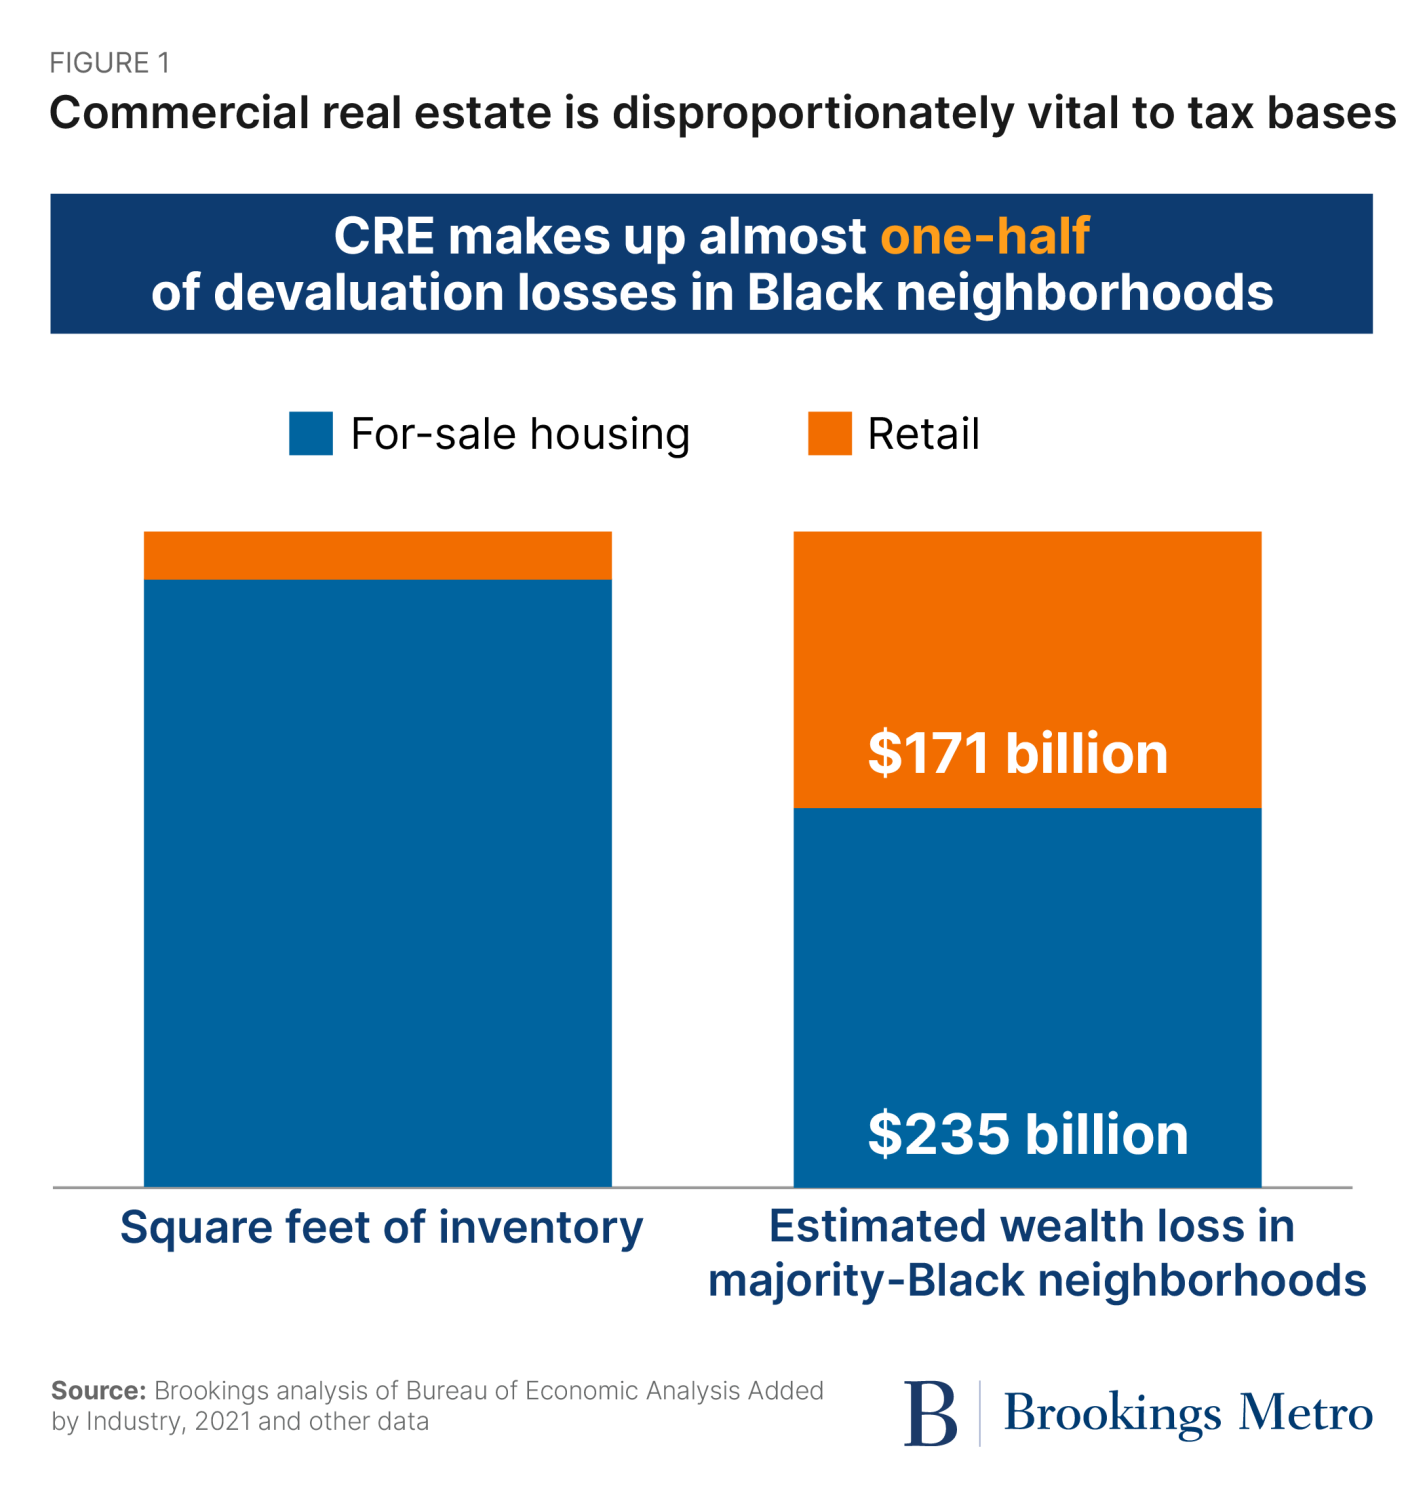 Figure 1. Commercial real estate is disproportionately vital to tax bases